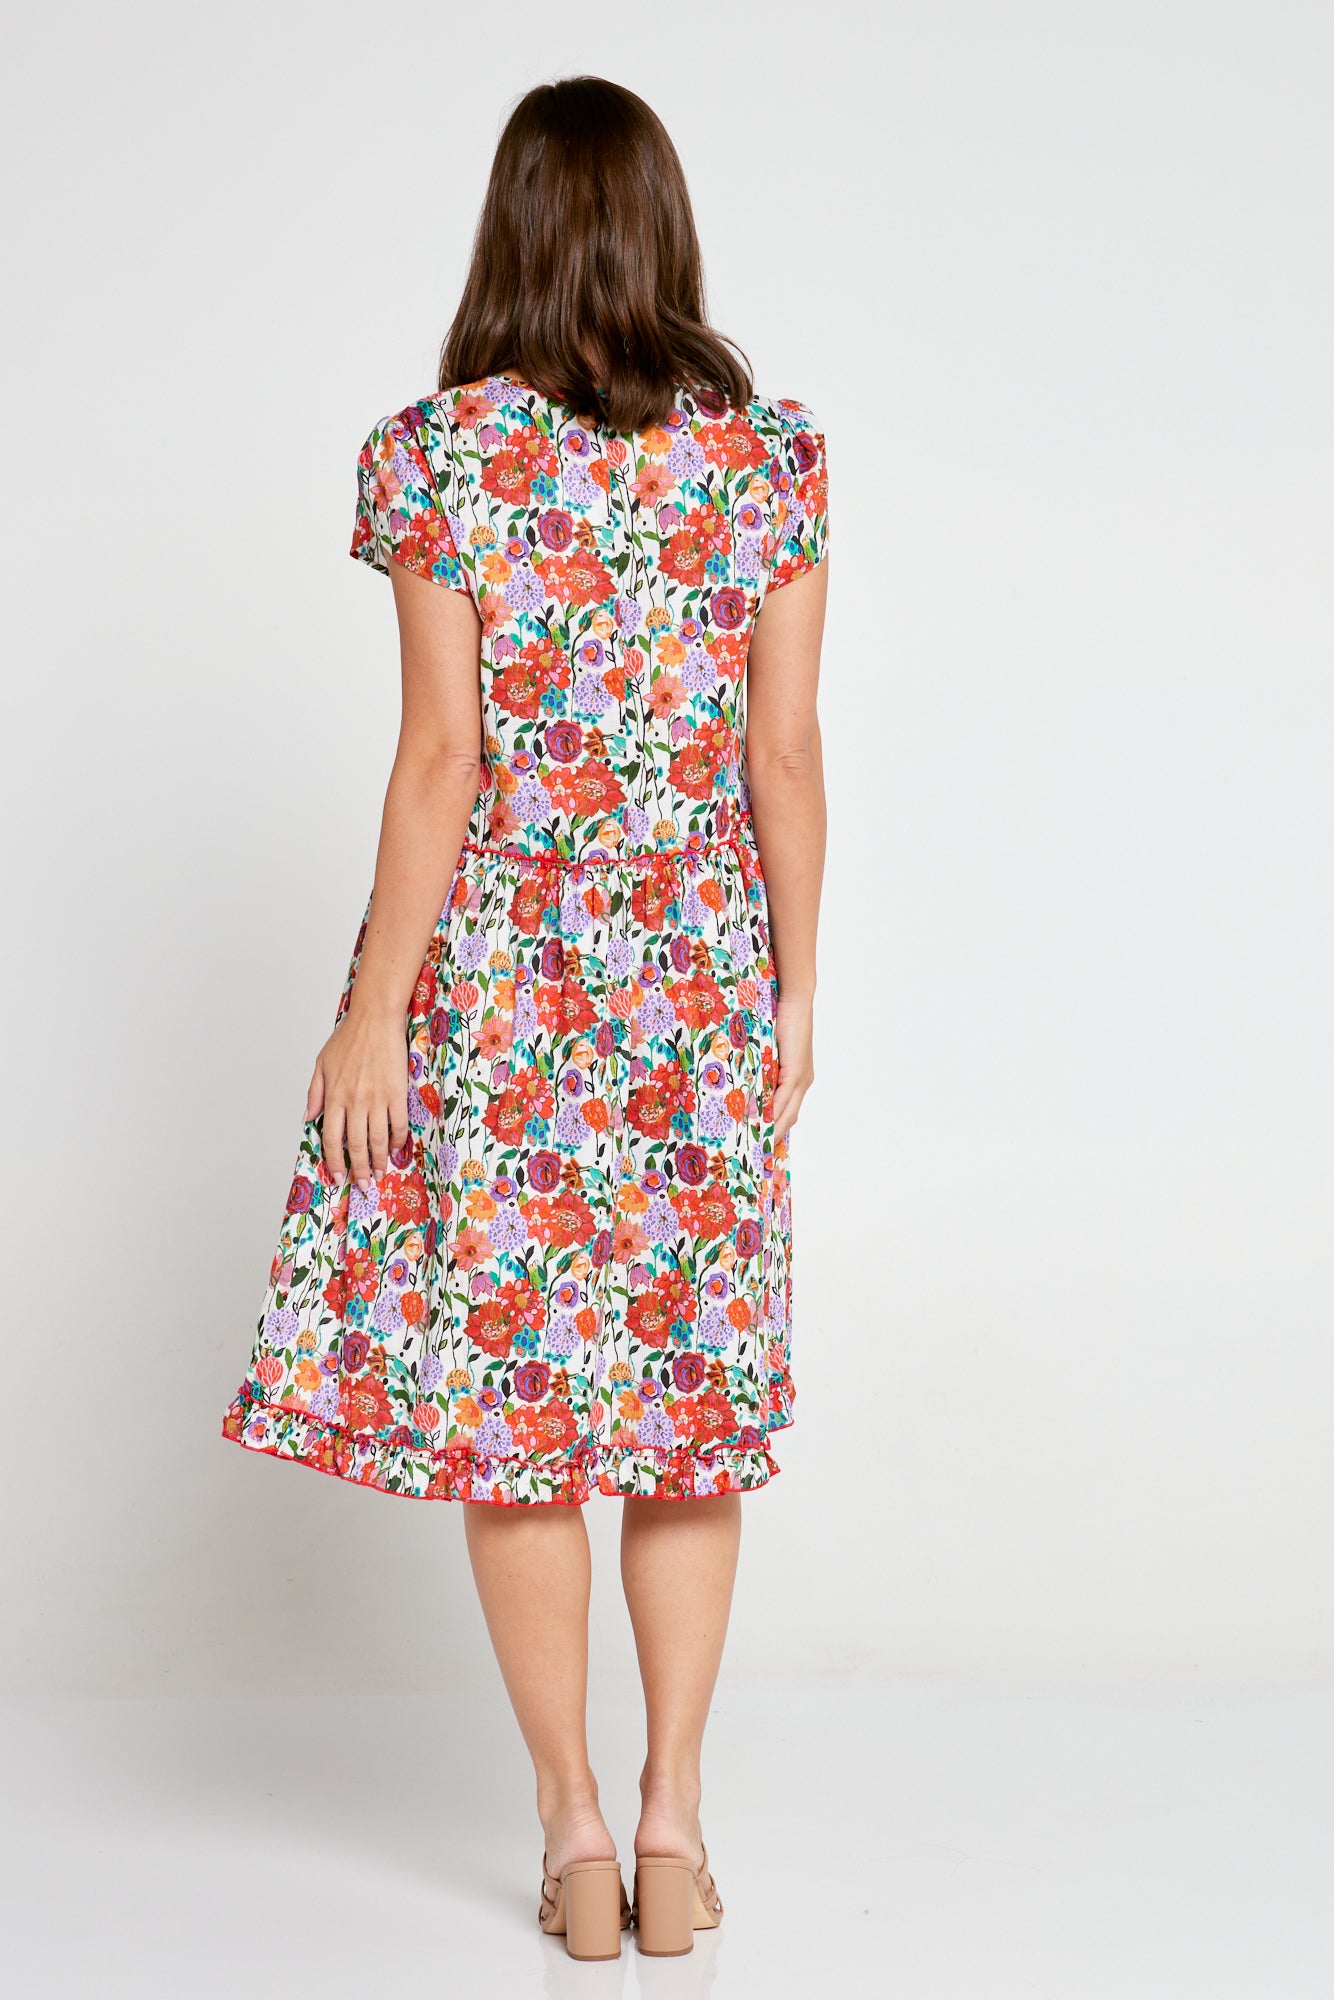 Persephone Cotton Dress - Red Floral